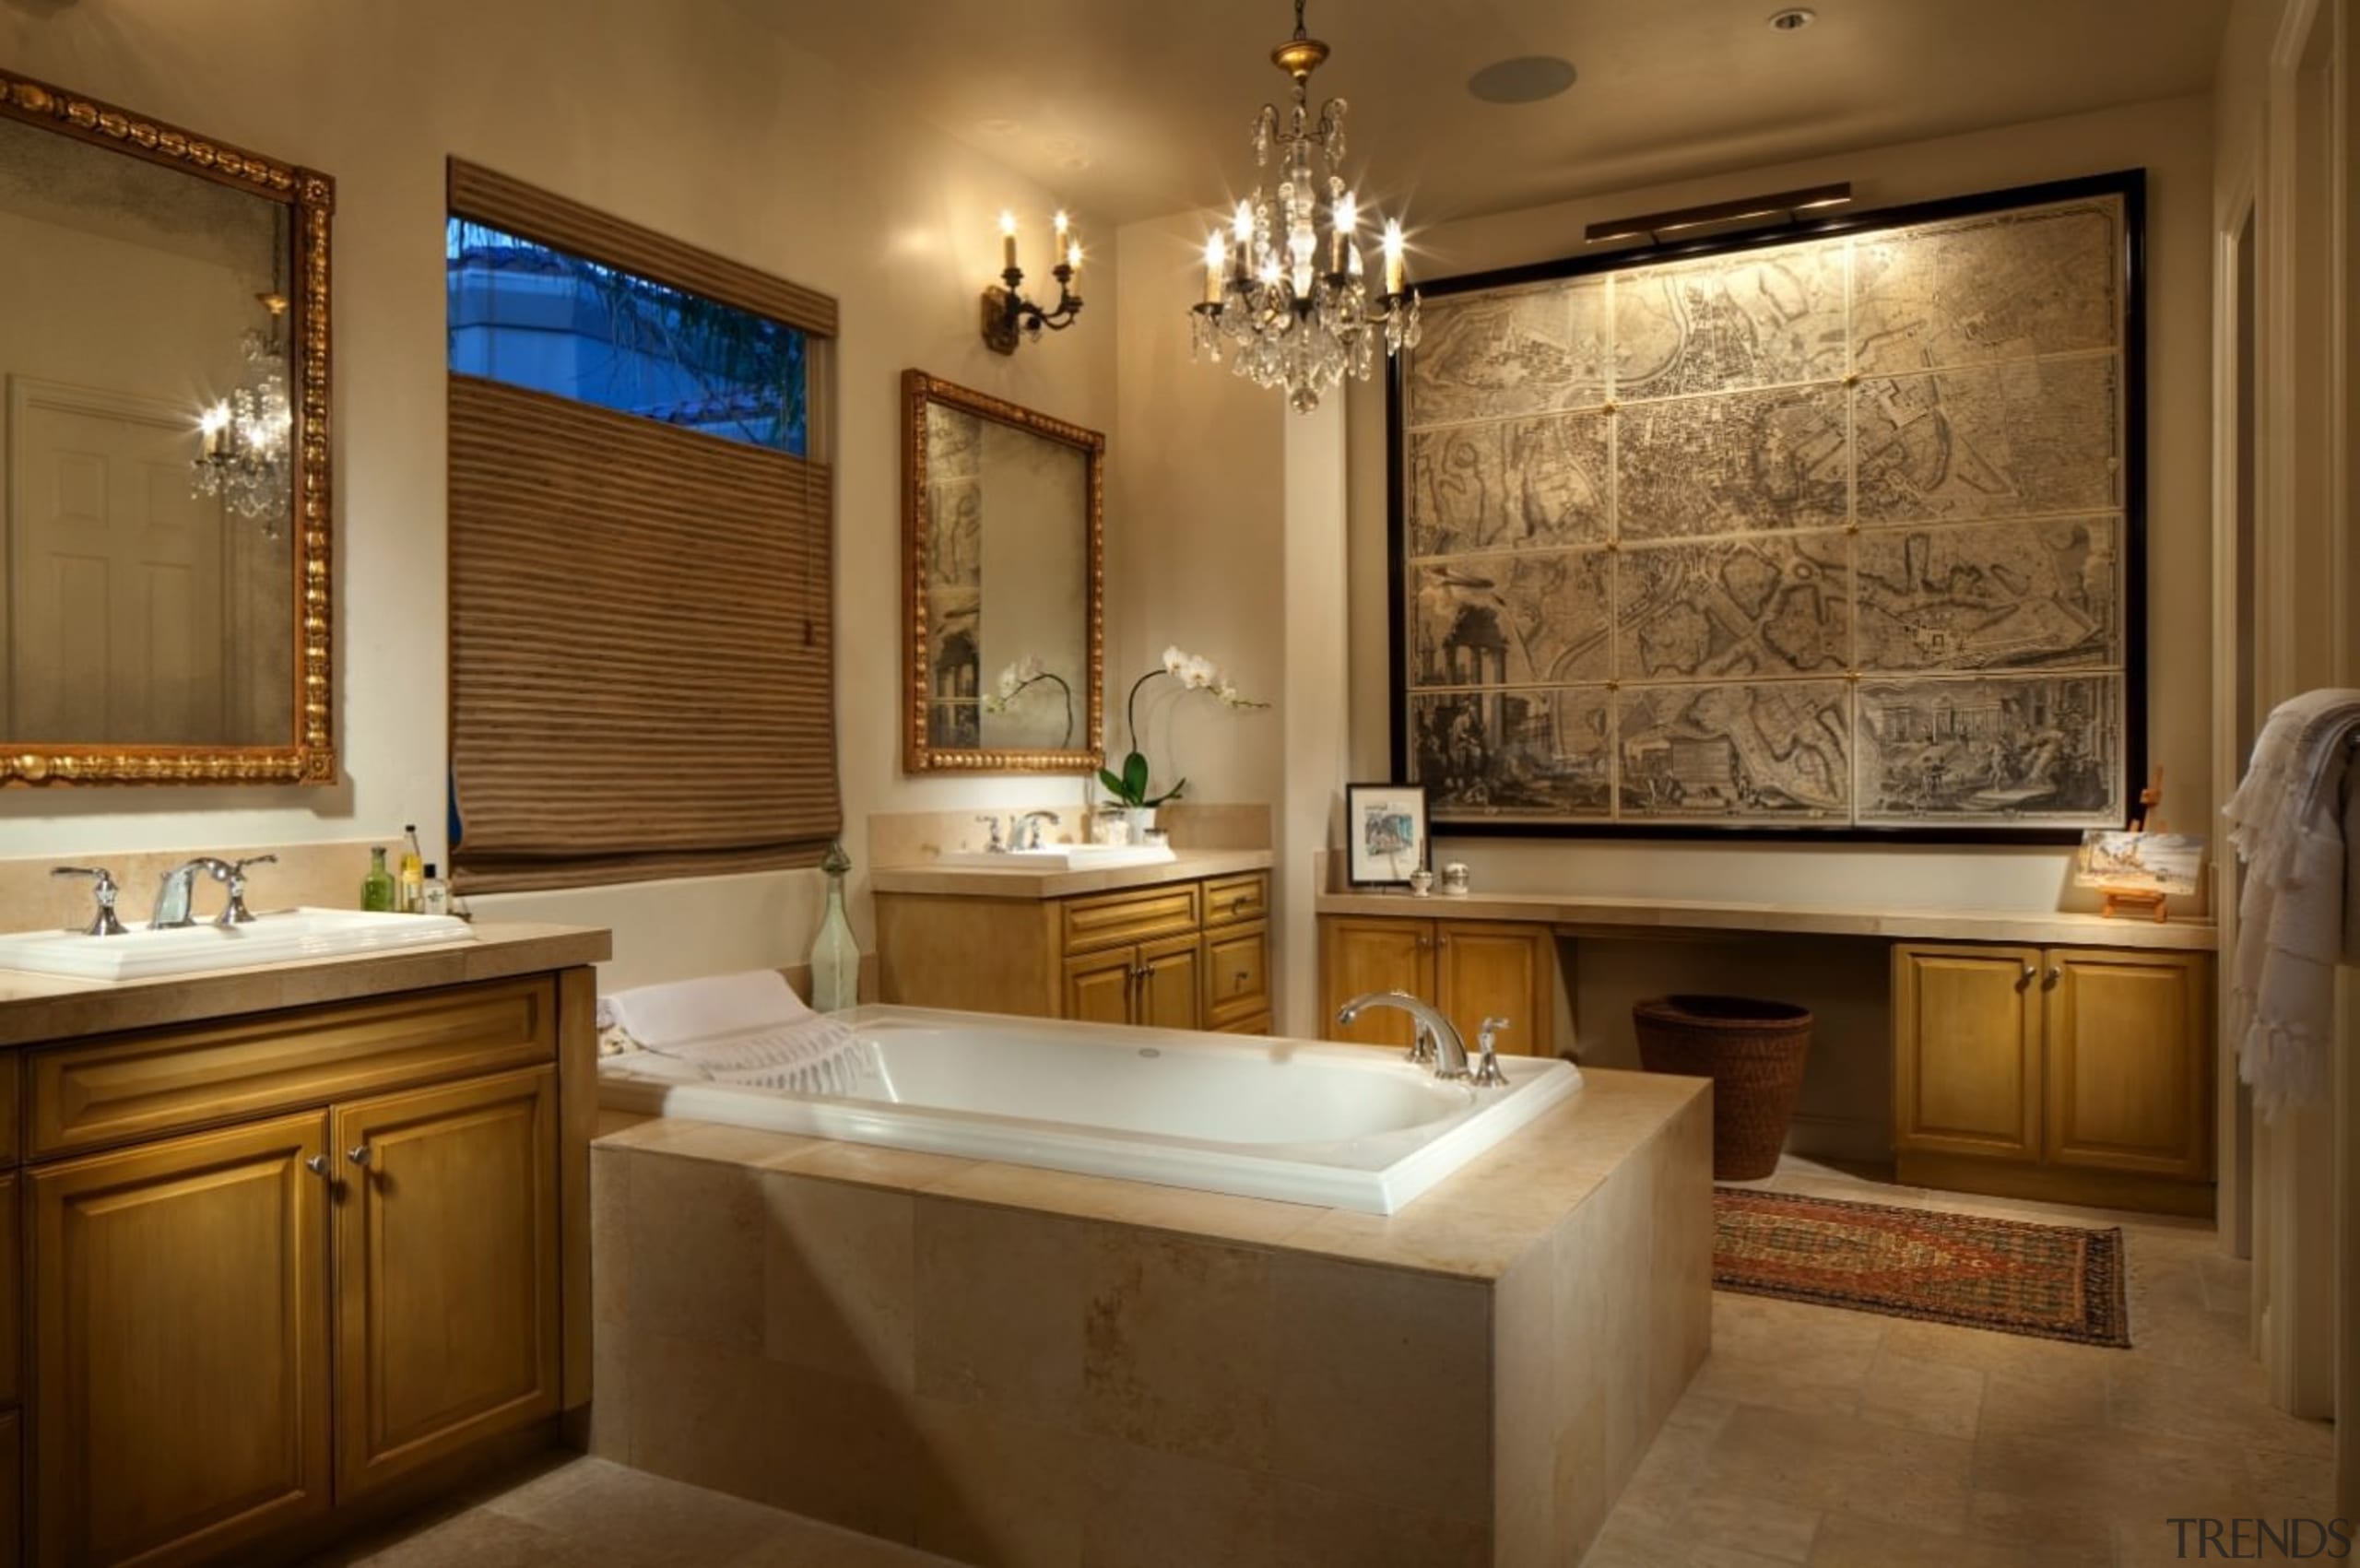 The bathroom features a large bath, window and bathroom, countertop, estate, home, interior design, real estate, room, window, brown